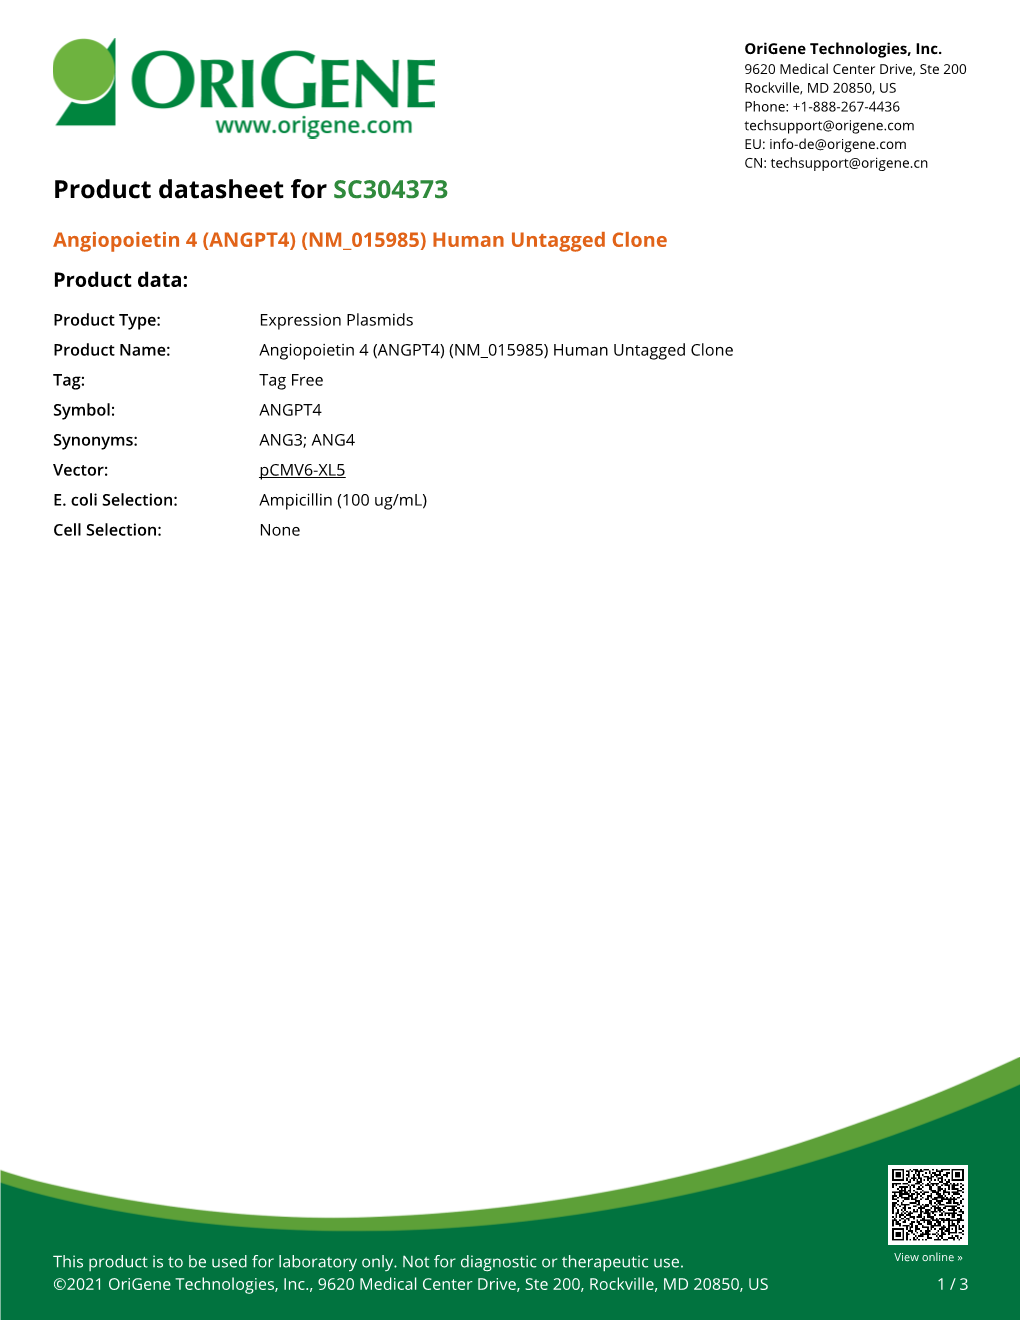 Angiopoietin 4 (ANGPT4) (NM 015985) Human Untagged Clone Product Data